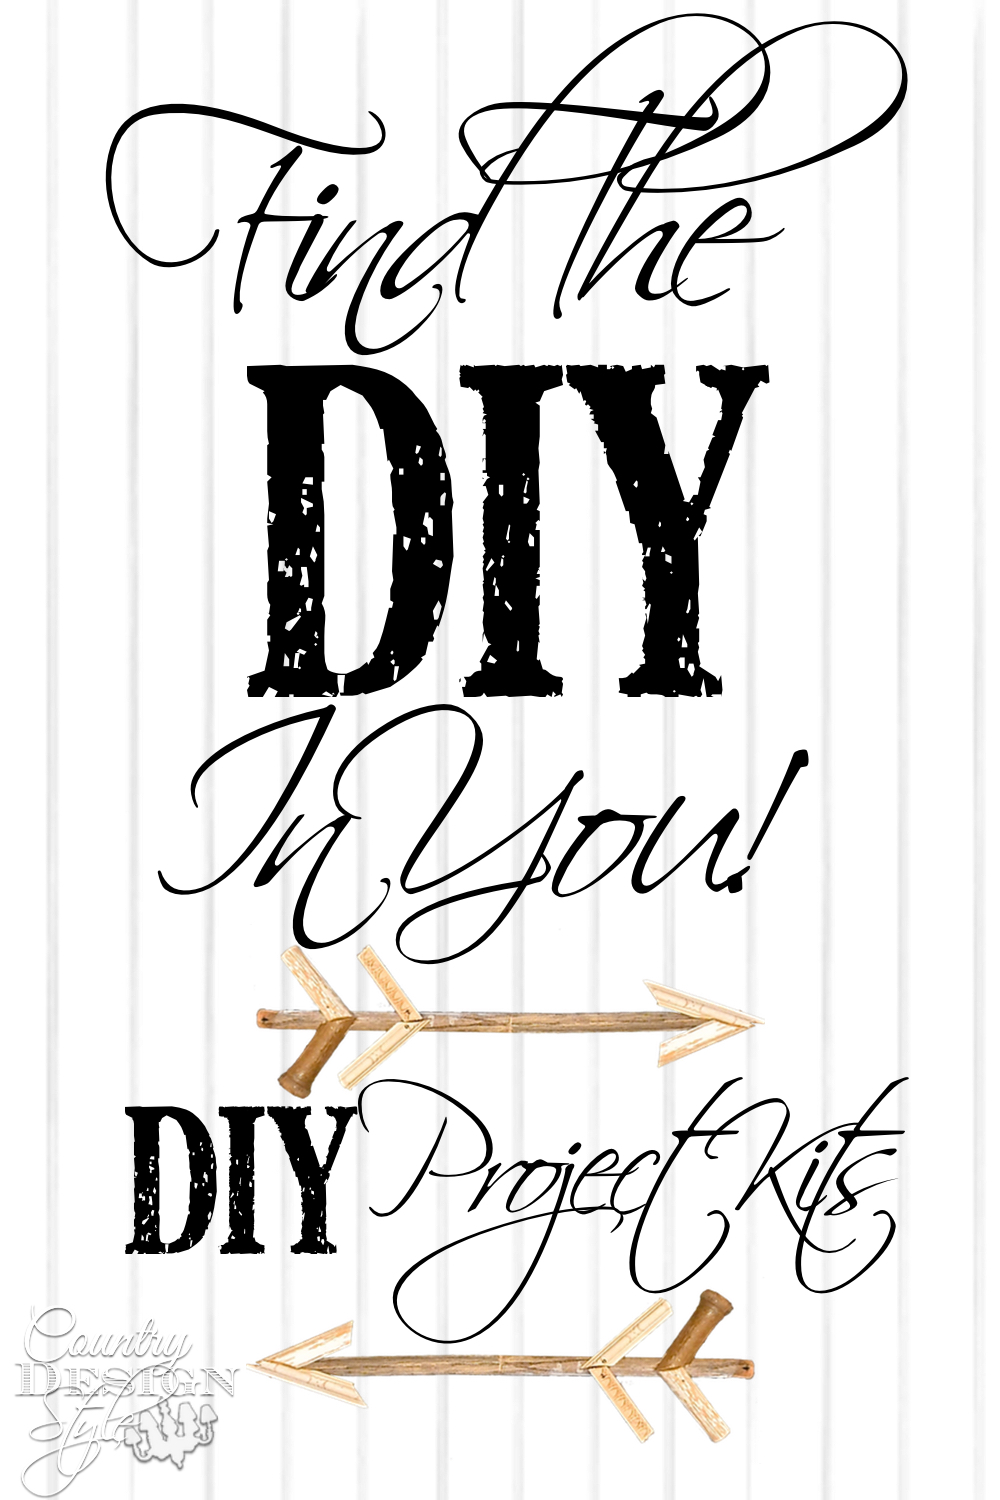 DIY Project kits! Order a DIY Project kit filled with materials to build your own creative DIY project. The designing & cutting is done for you! Country Design Style